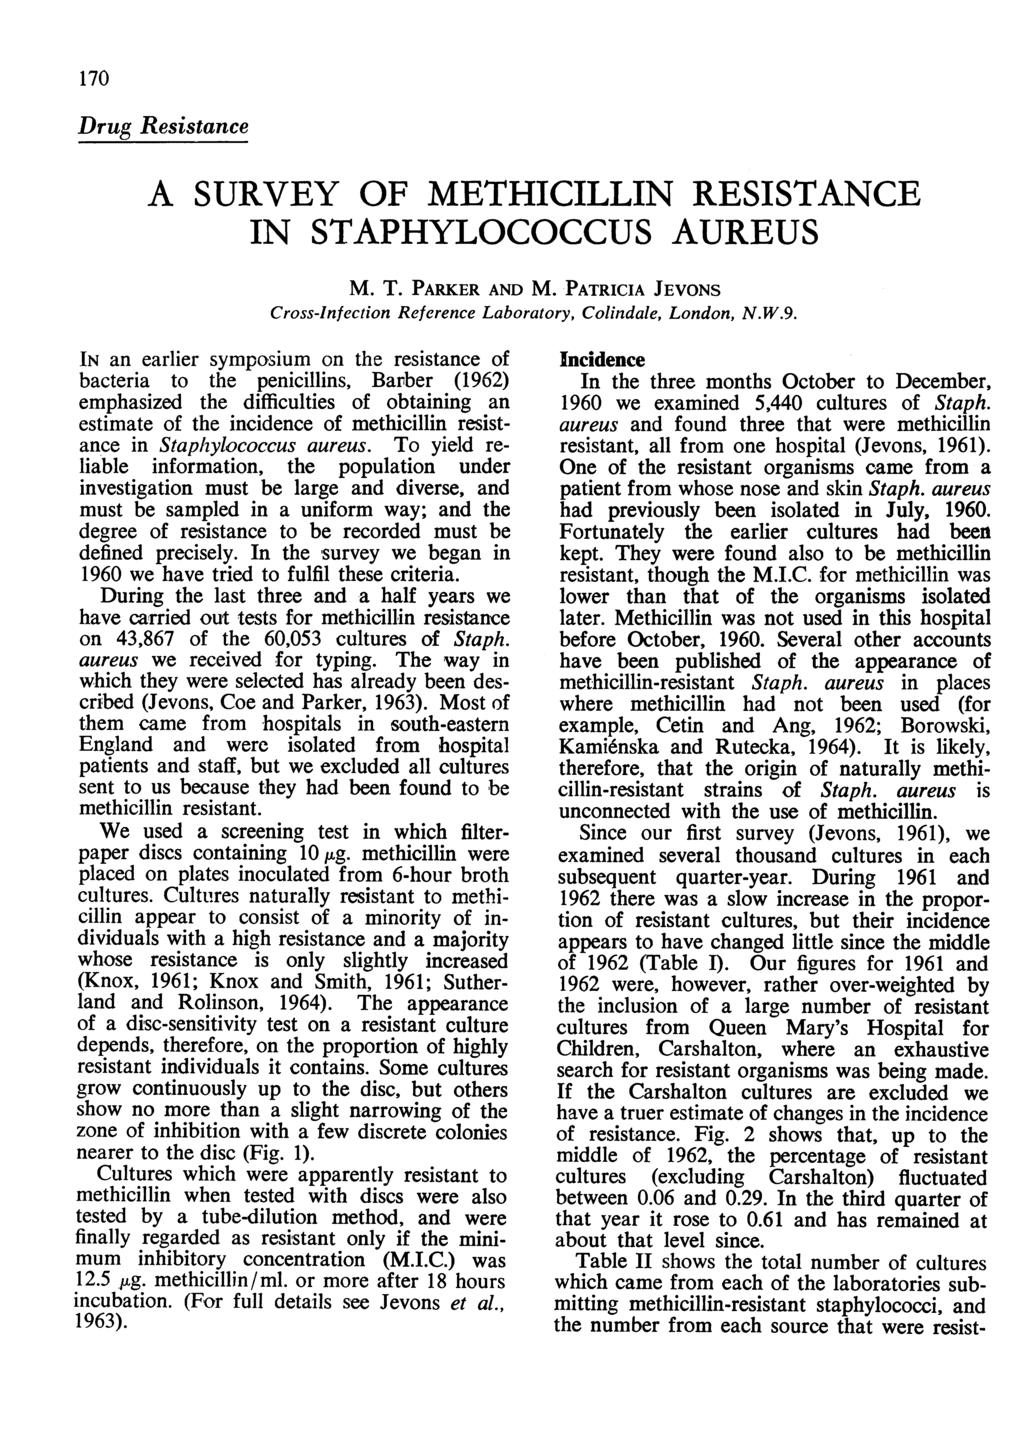 170 Drug Resistance A SURVEY OF METHICILLIN RESISTANCE IN STAPHYLOCOCCUS AUREUS M. T. PARKER AND M. PATRICIA JEVONS CrossInfection Reference Laboratory, Colindale, London, N.W.9.